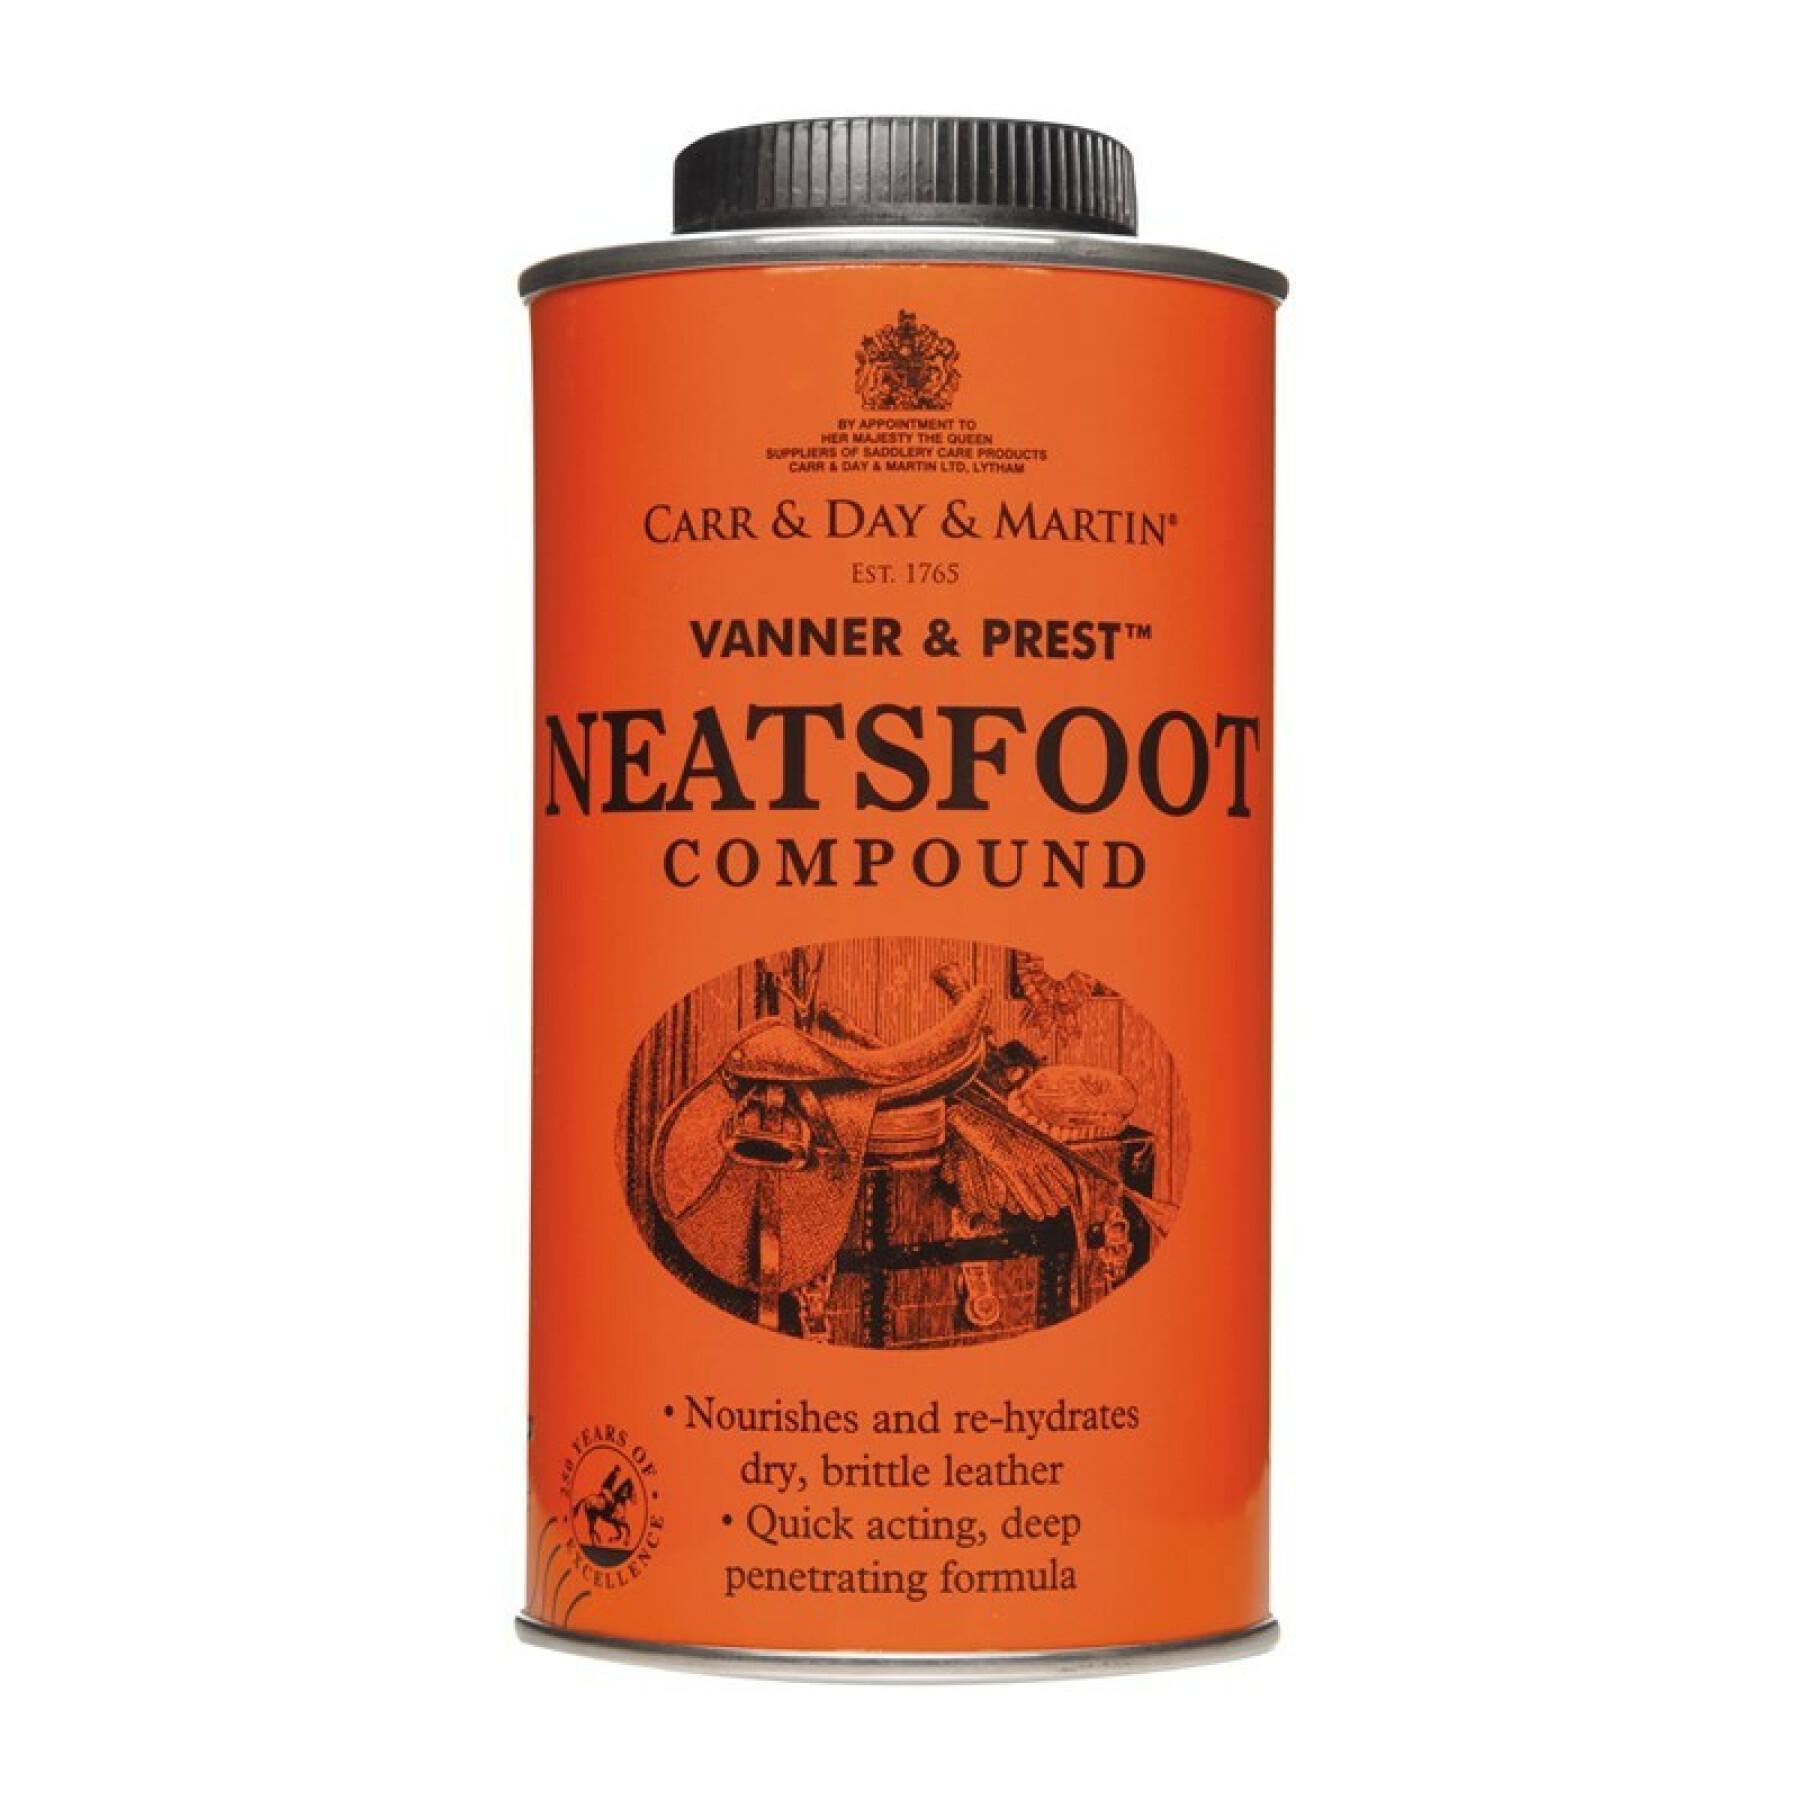 Huile pour cuir Carr&Day&Martin Vanner & prest neatsfoot compound 500 ml